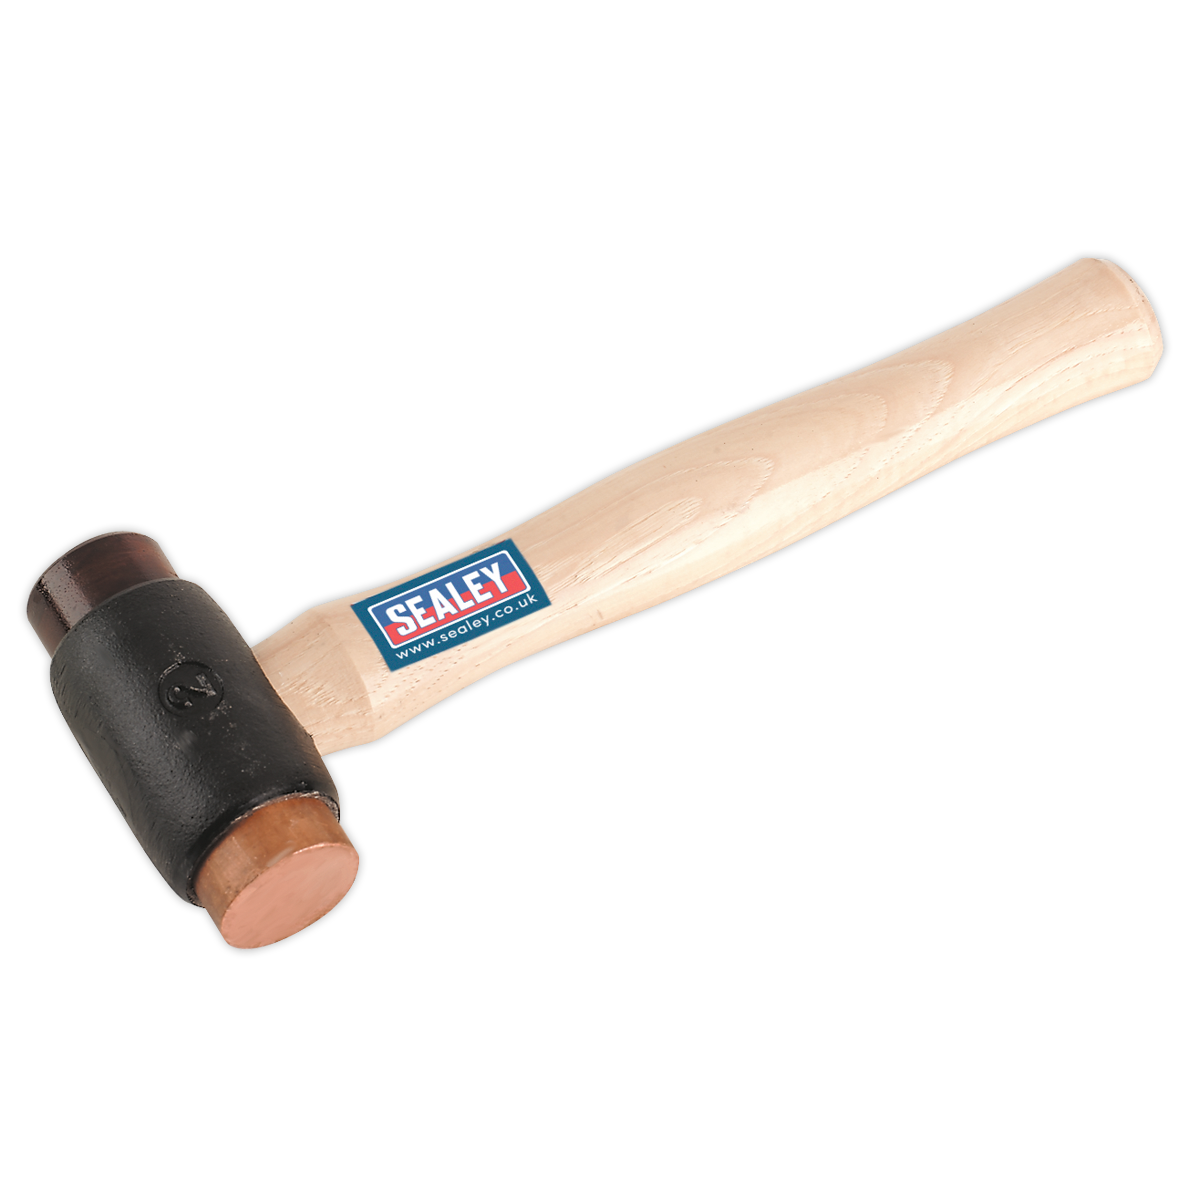 Copper/Rawhide Faced Hammer 2.25lb Hickory Shaft - CRF25 - Farming Parts